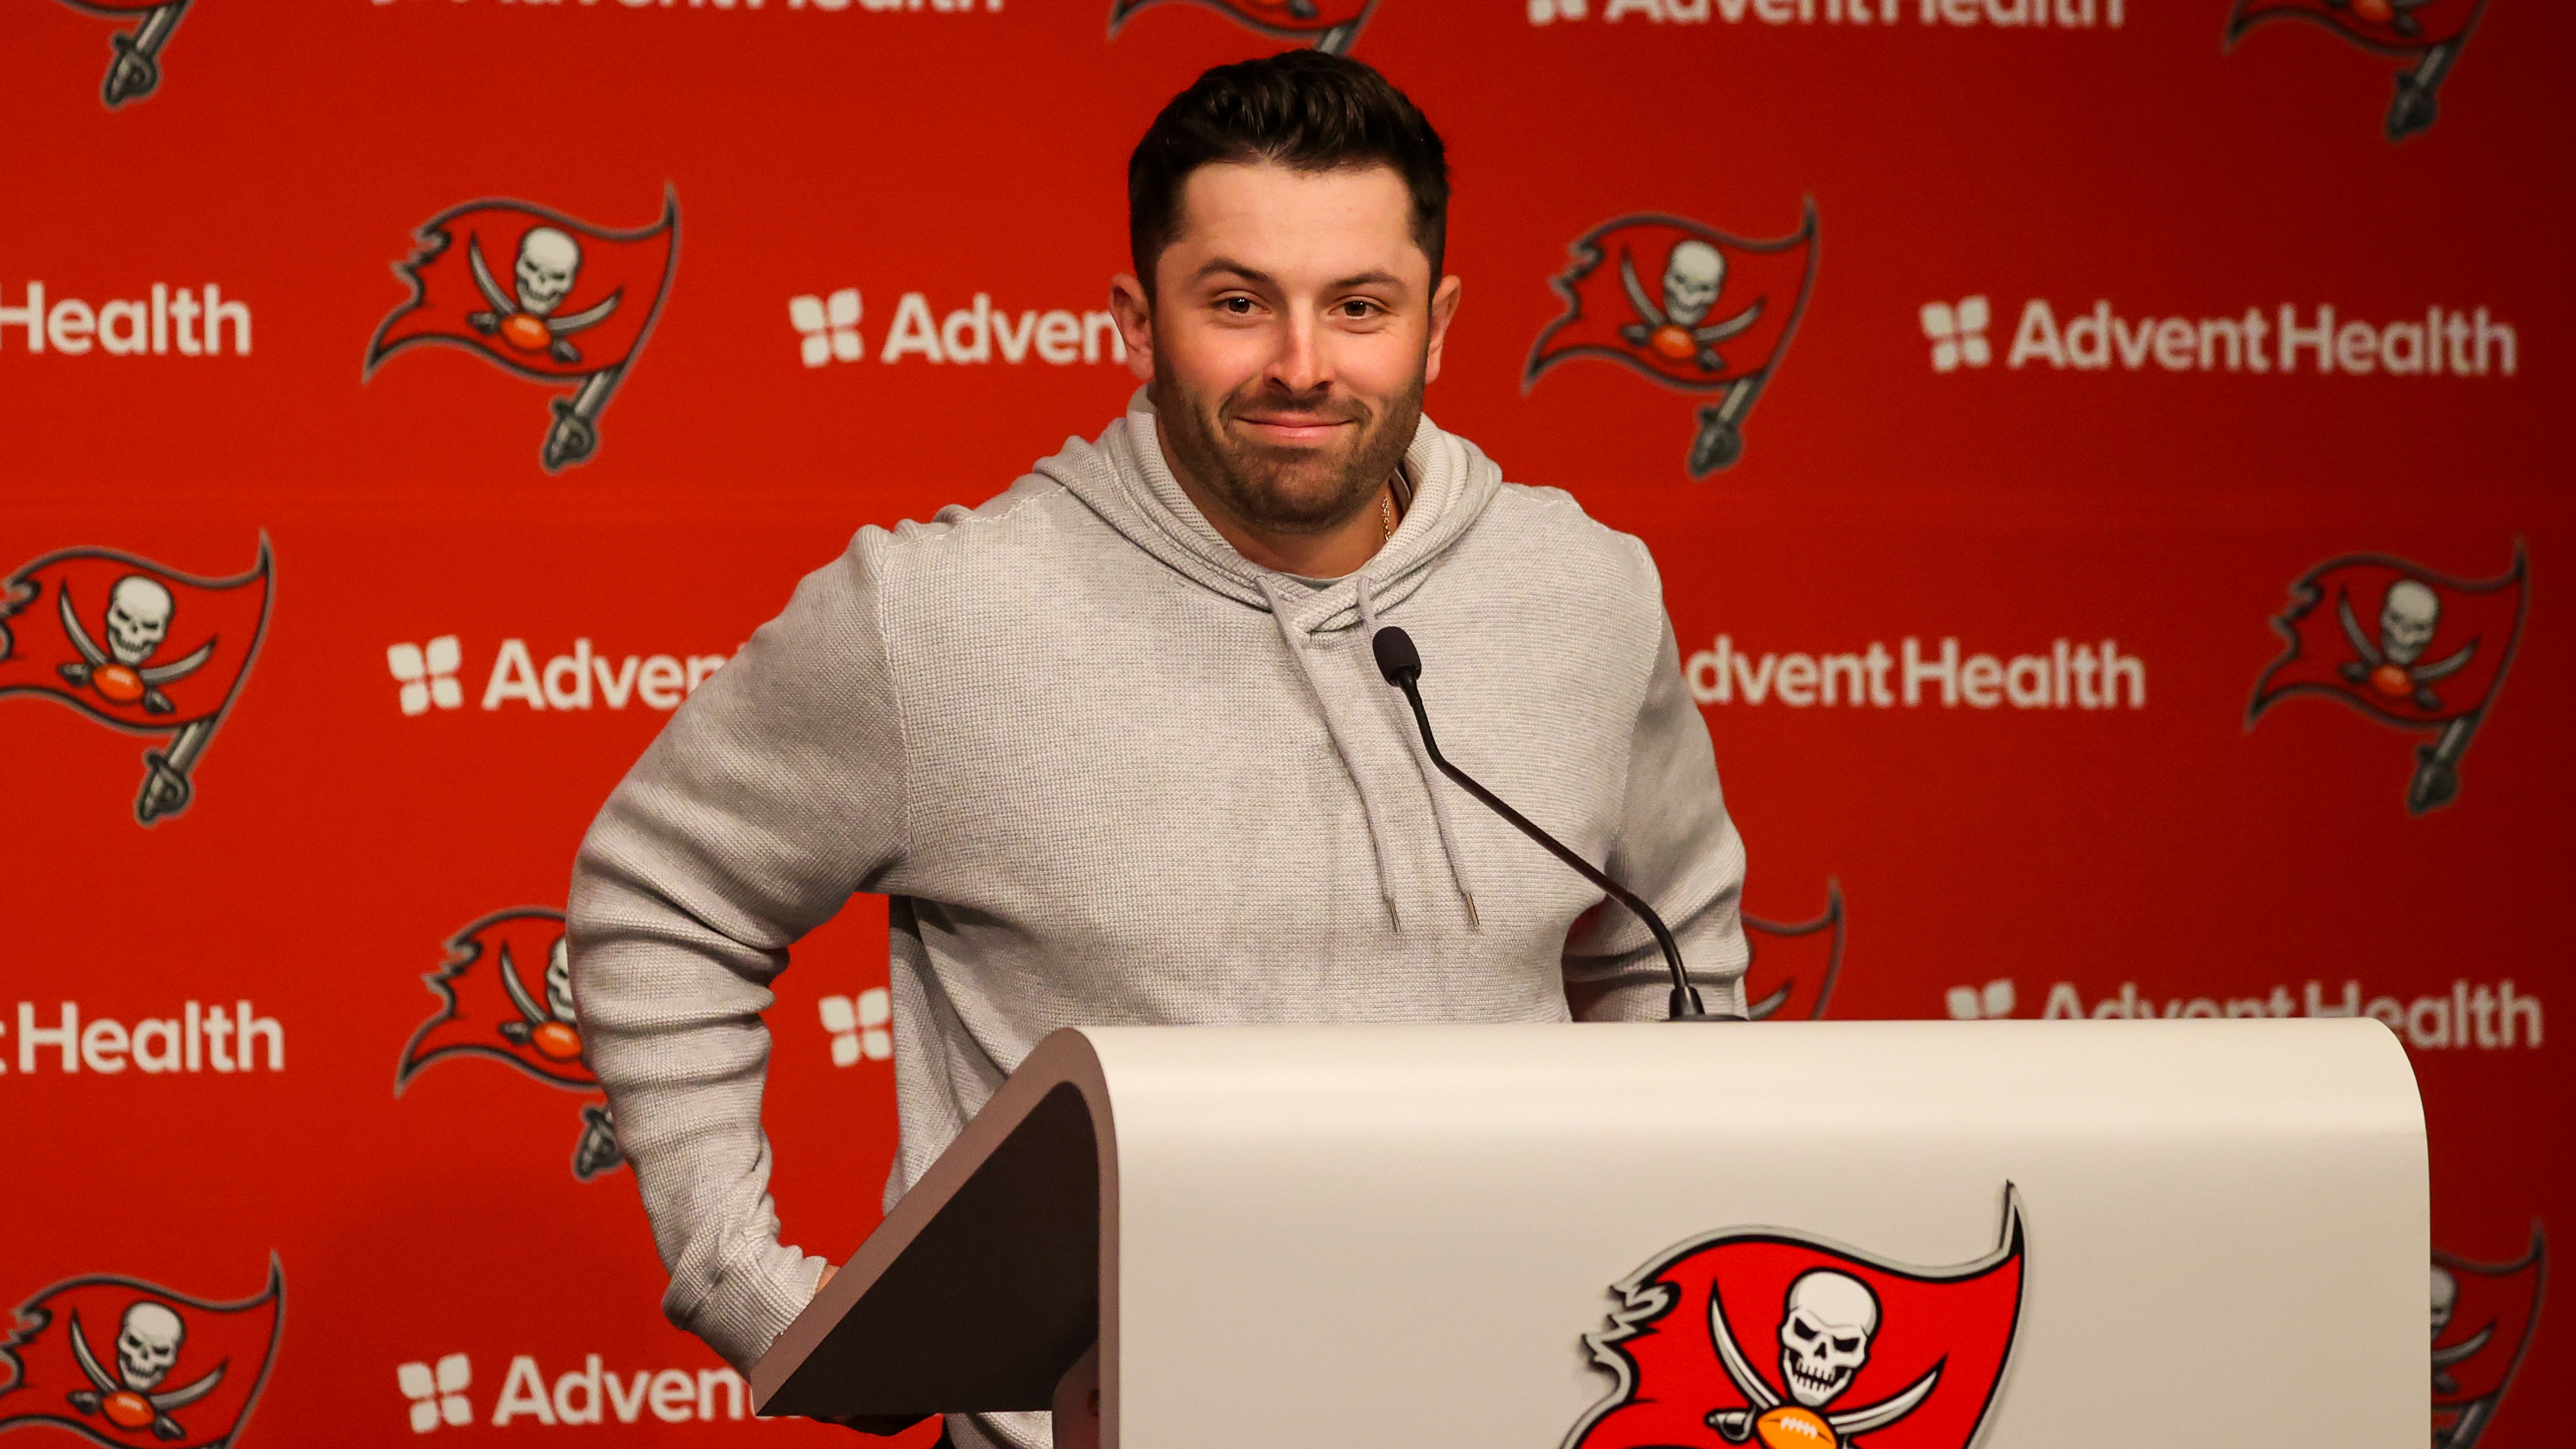 The Bucs were supposed to stink without Tom Brady. Then came Baker Mayfield, Tampa Bay Buccaneers